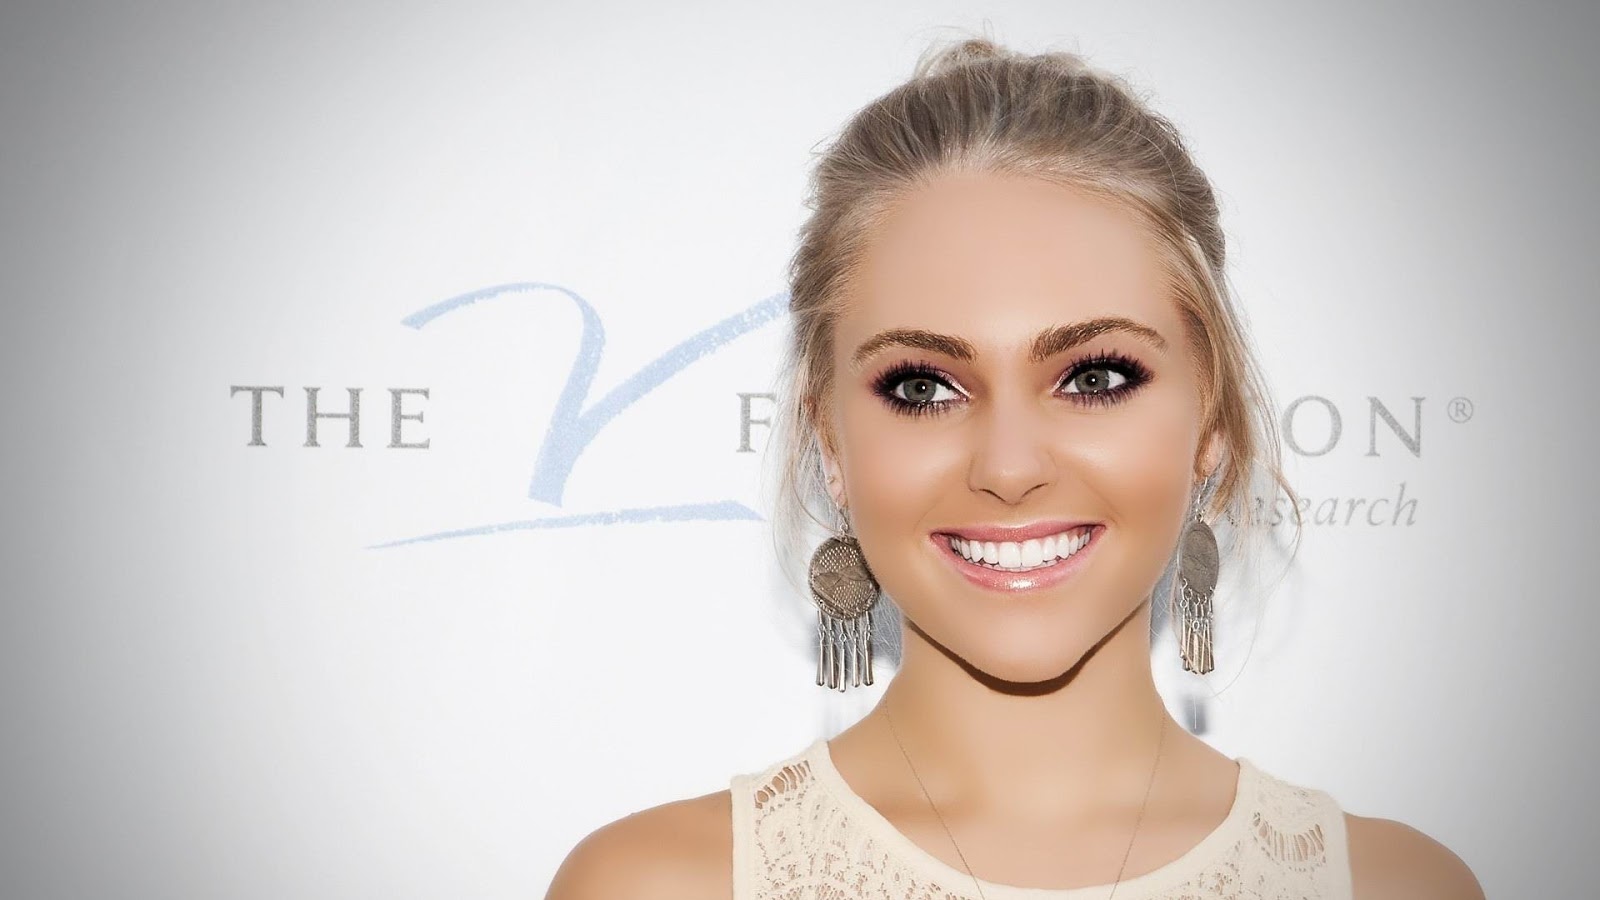 AnnaSophia Robb HD Images and Wallpapers - Hollywood Actress